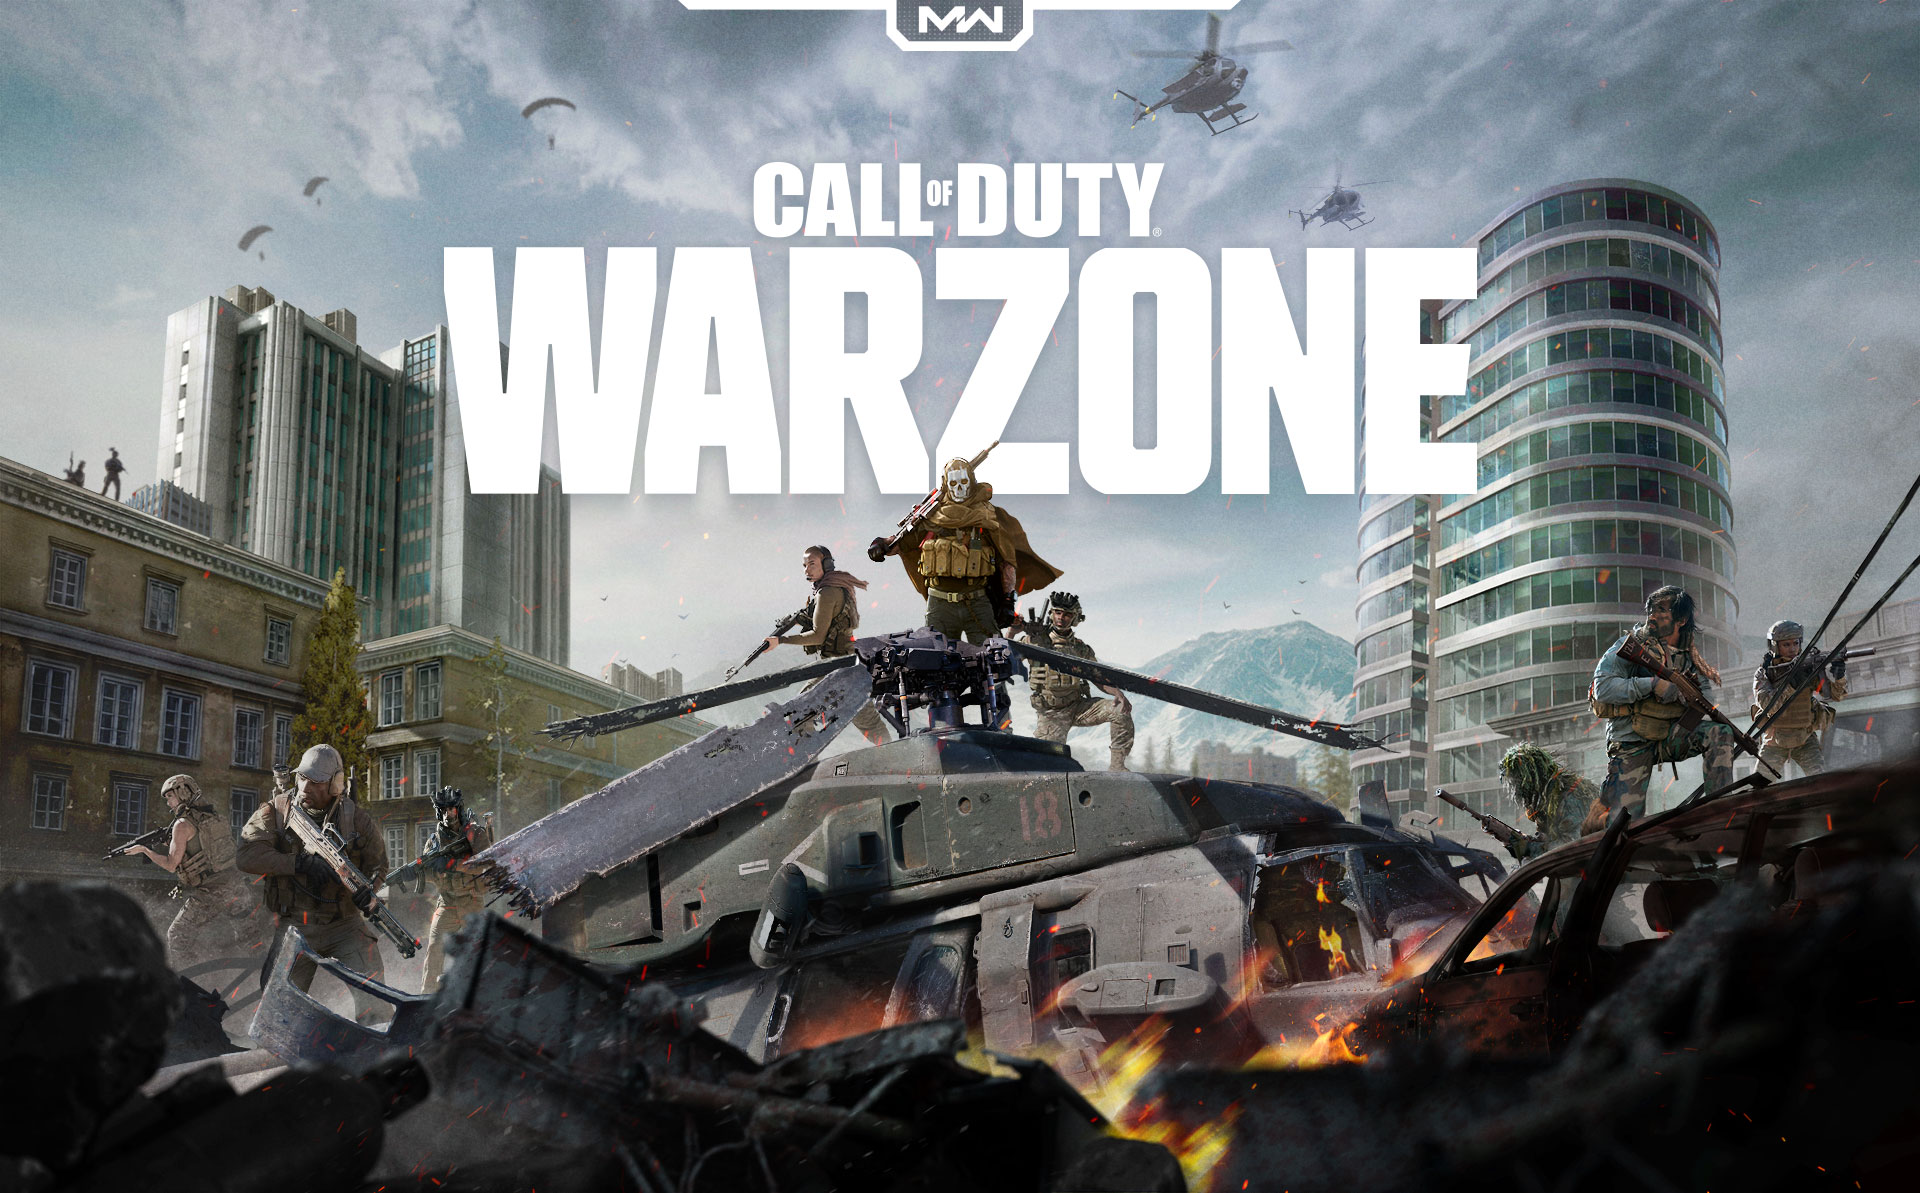 Call of Duty: Warzone may be for smartphones